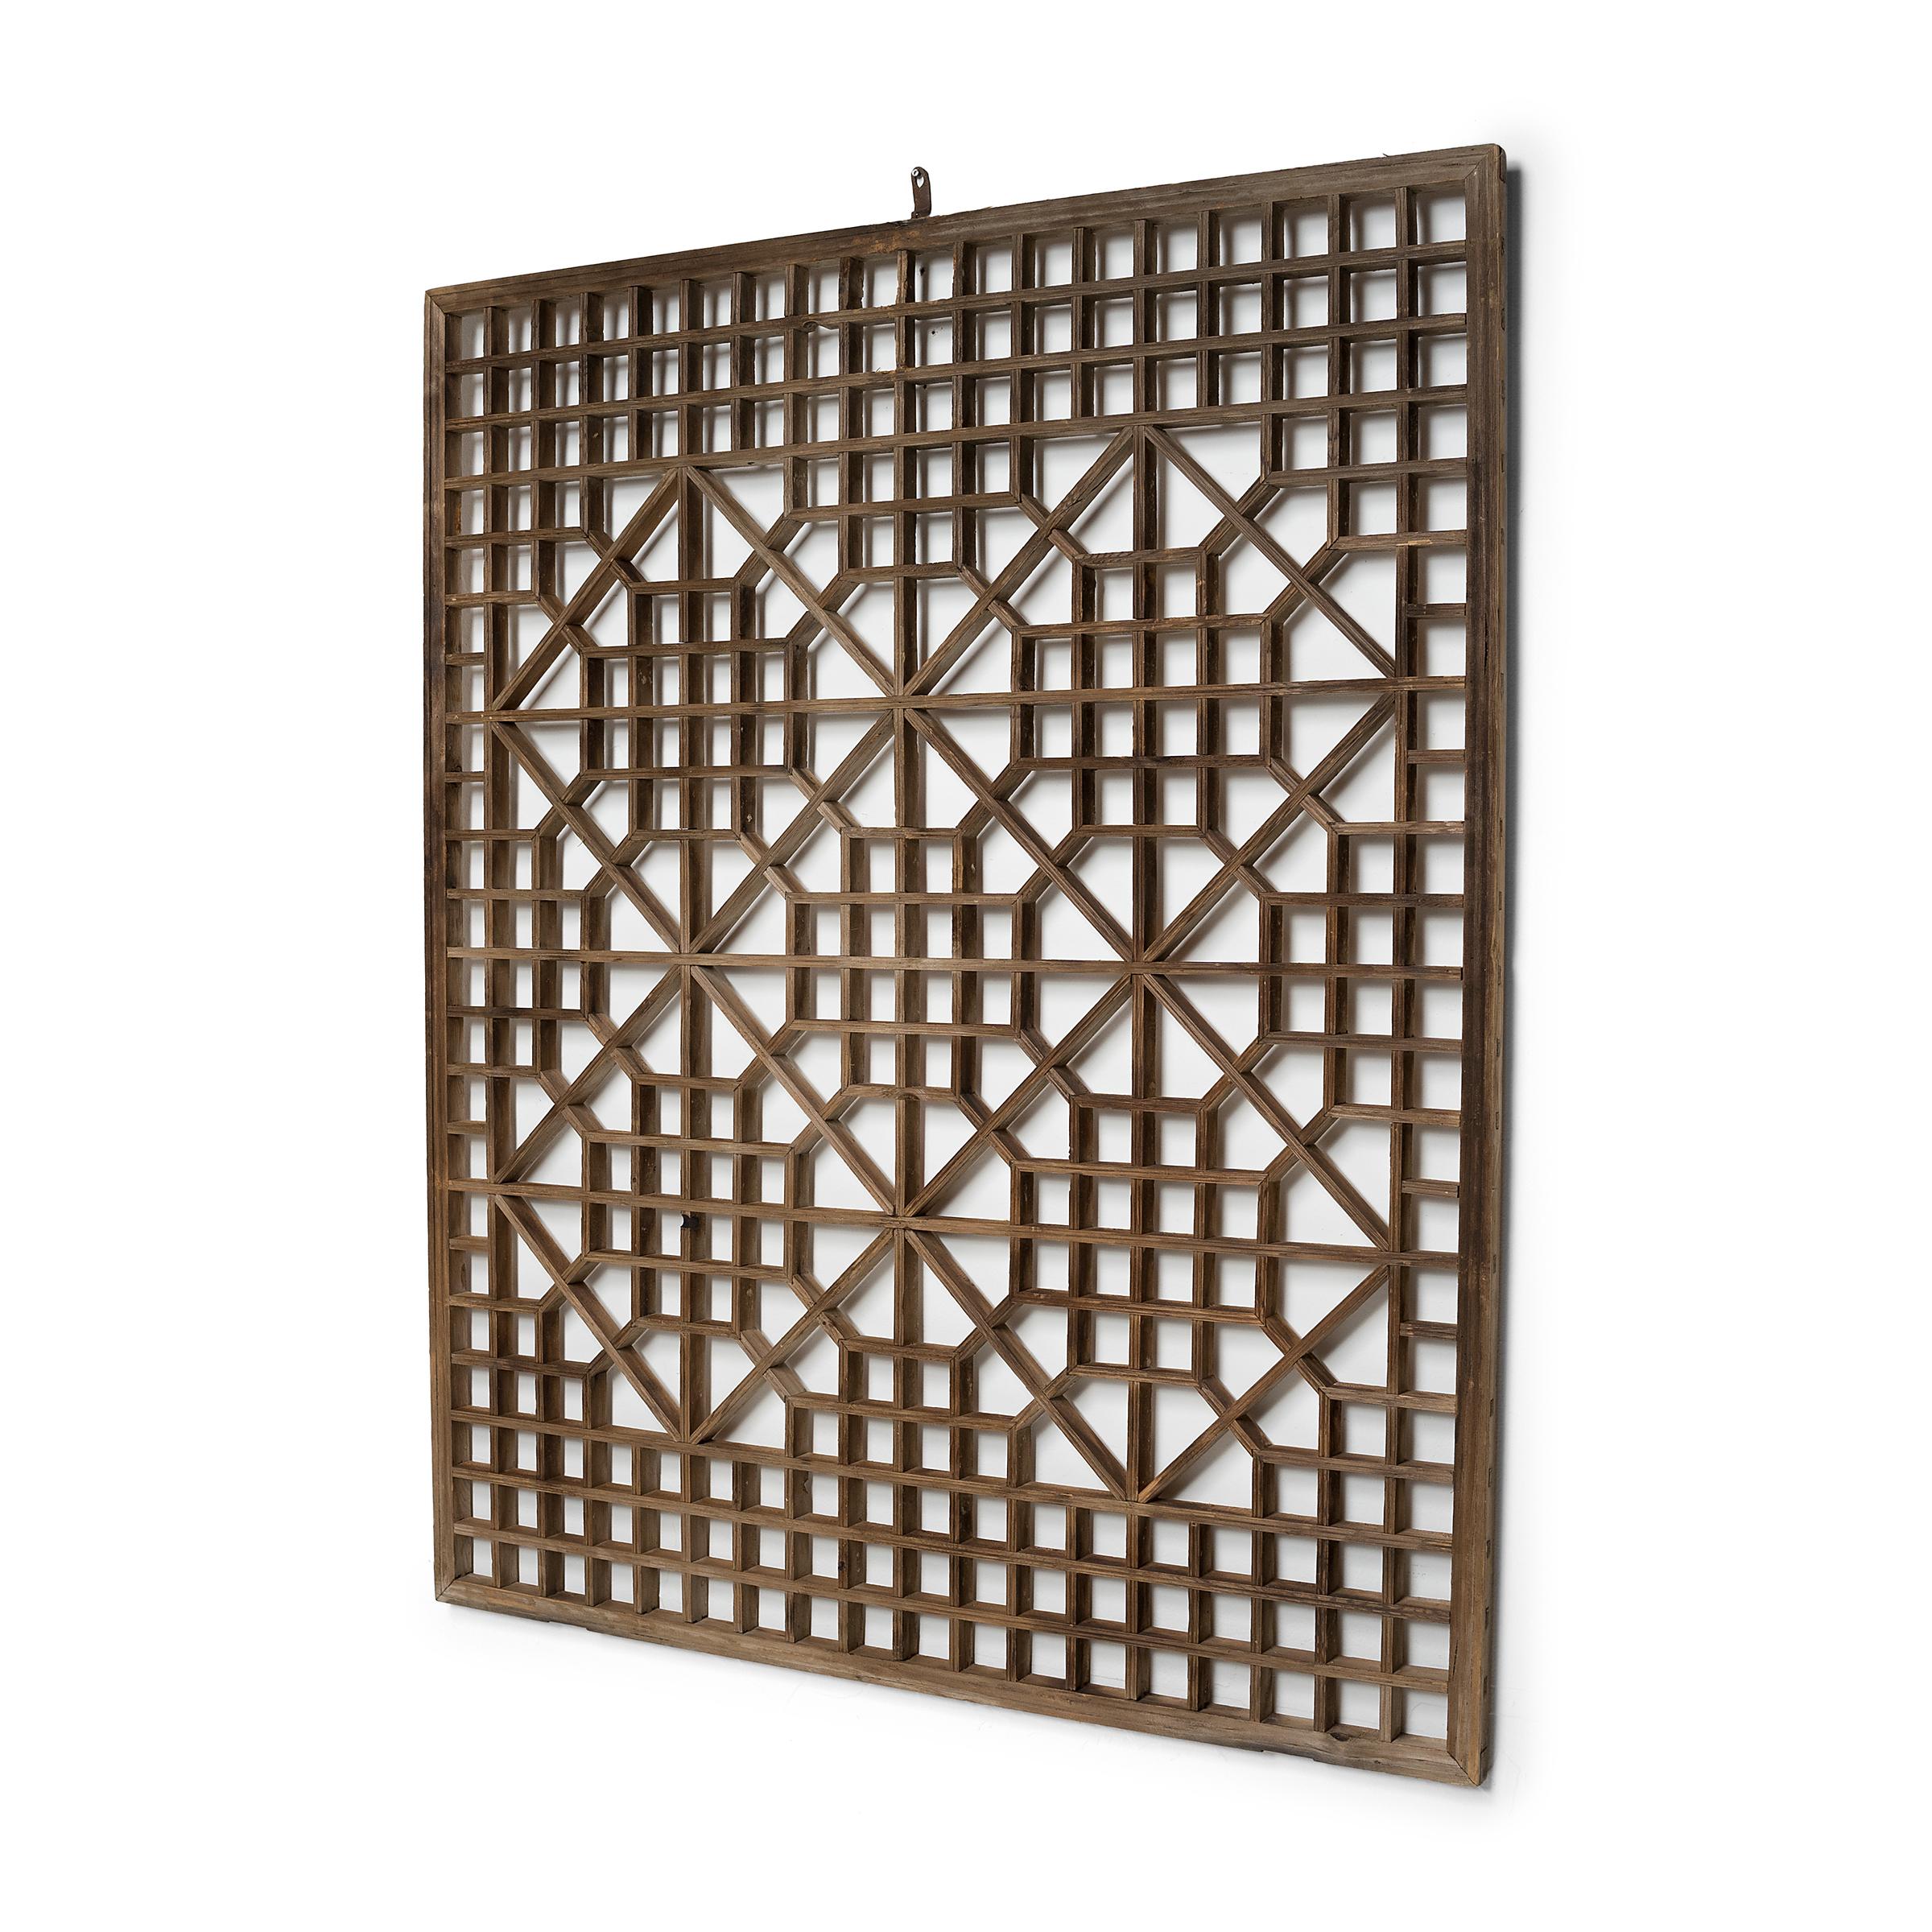 This early 20th century lattice window panel likely originated in a northern Chinese home with neutral and balanced interiors. The geometric lattice pattern is linear and open, and was designed to allow light and air into a room while maintaining